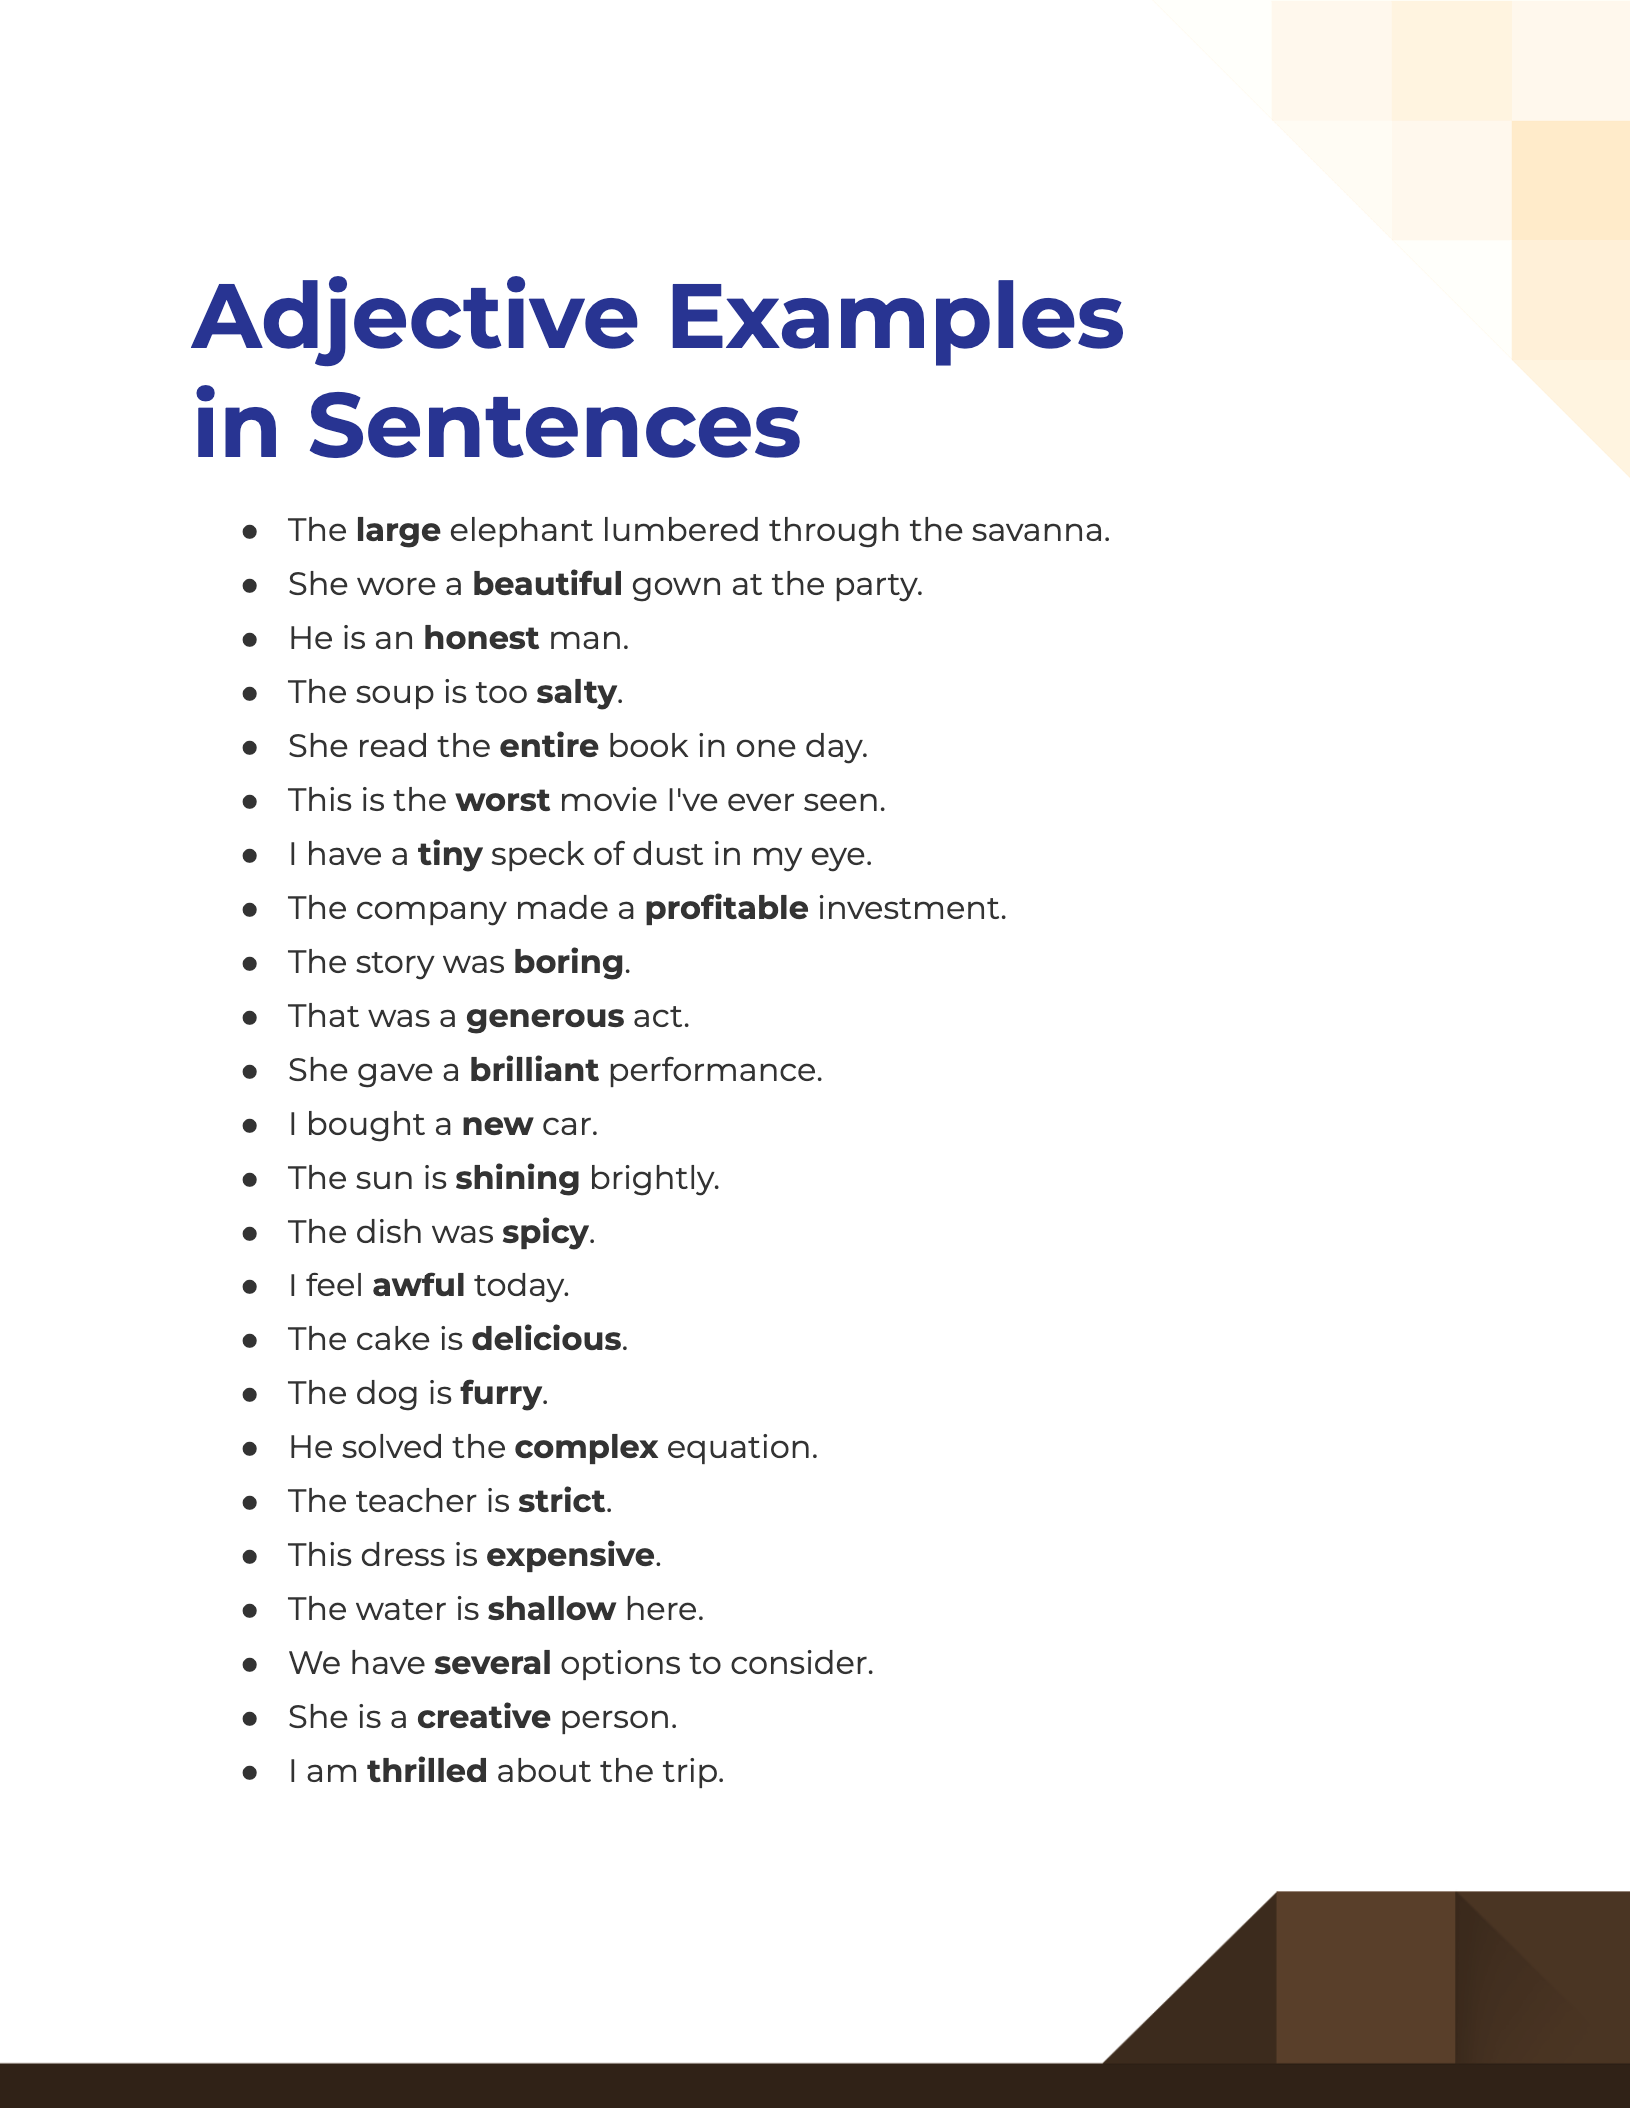 adjective examples in sentences 